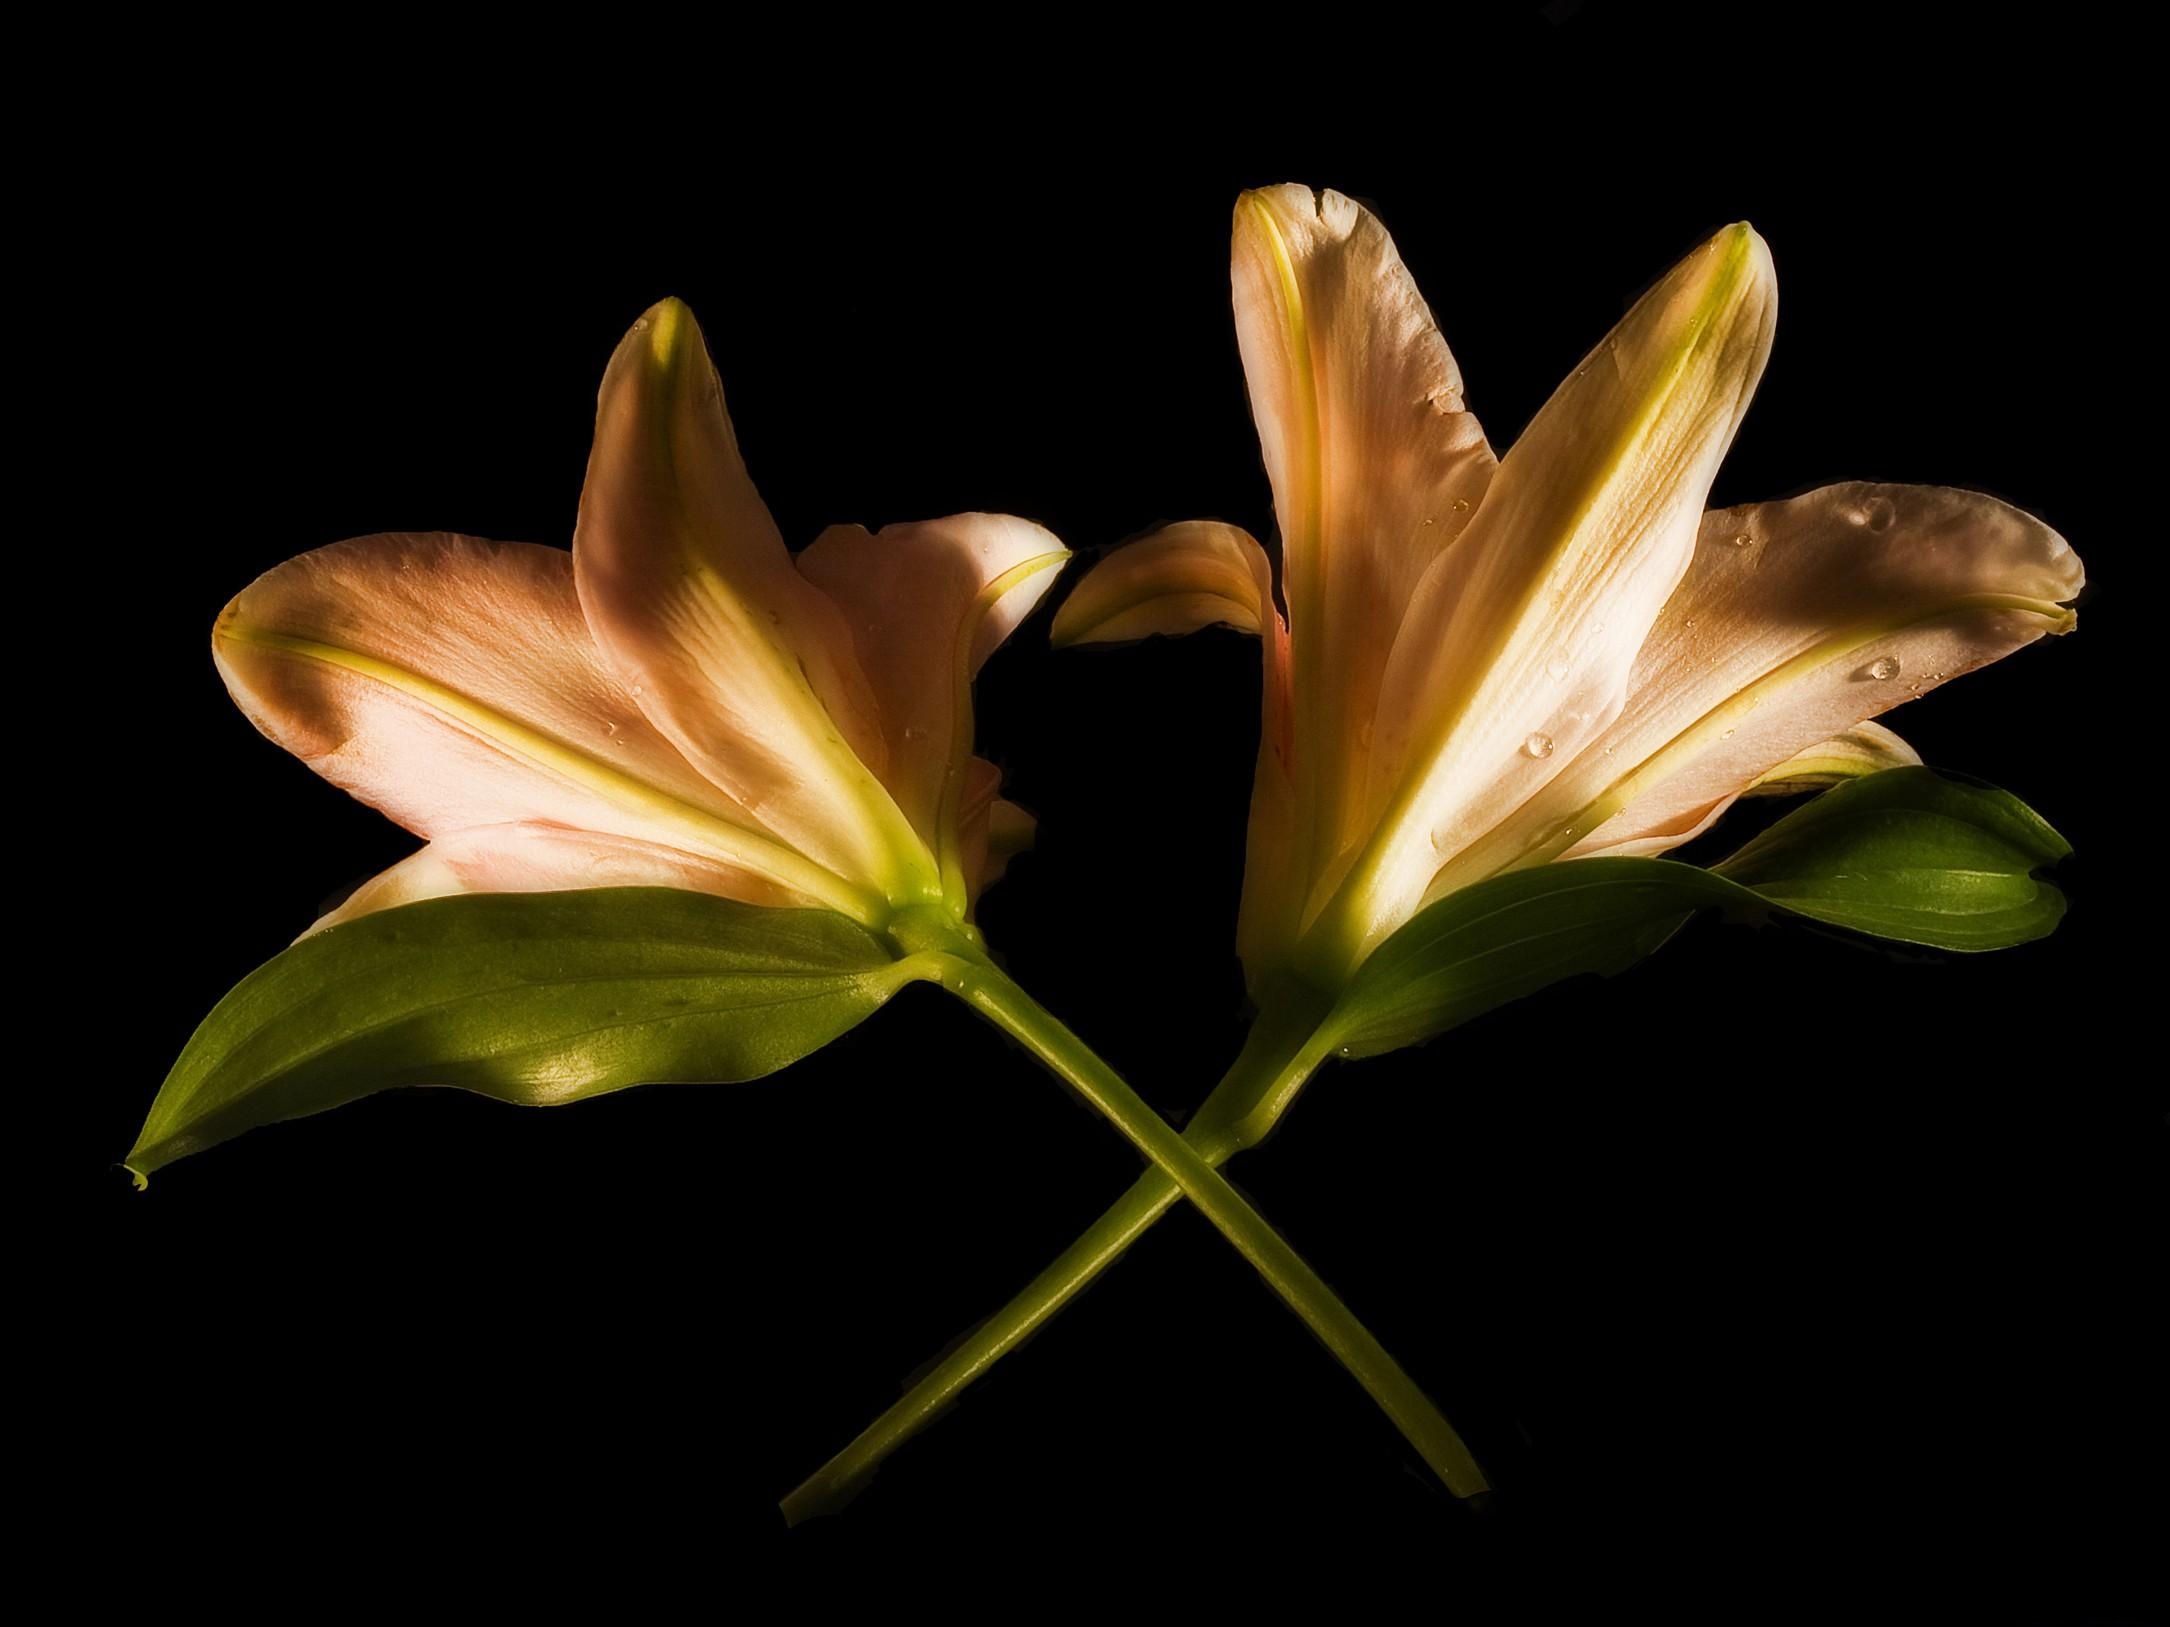 Cool Backgrounds crossing, flowers, pair, lilies Black Background